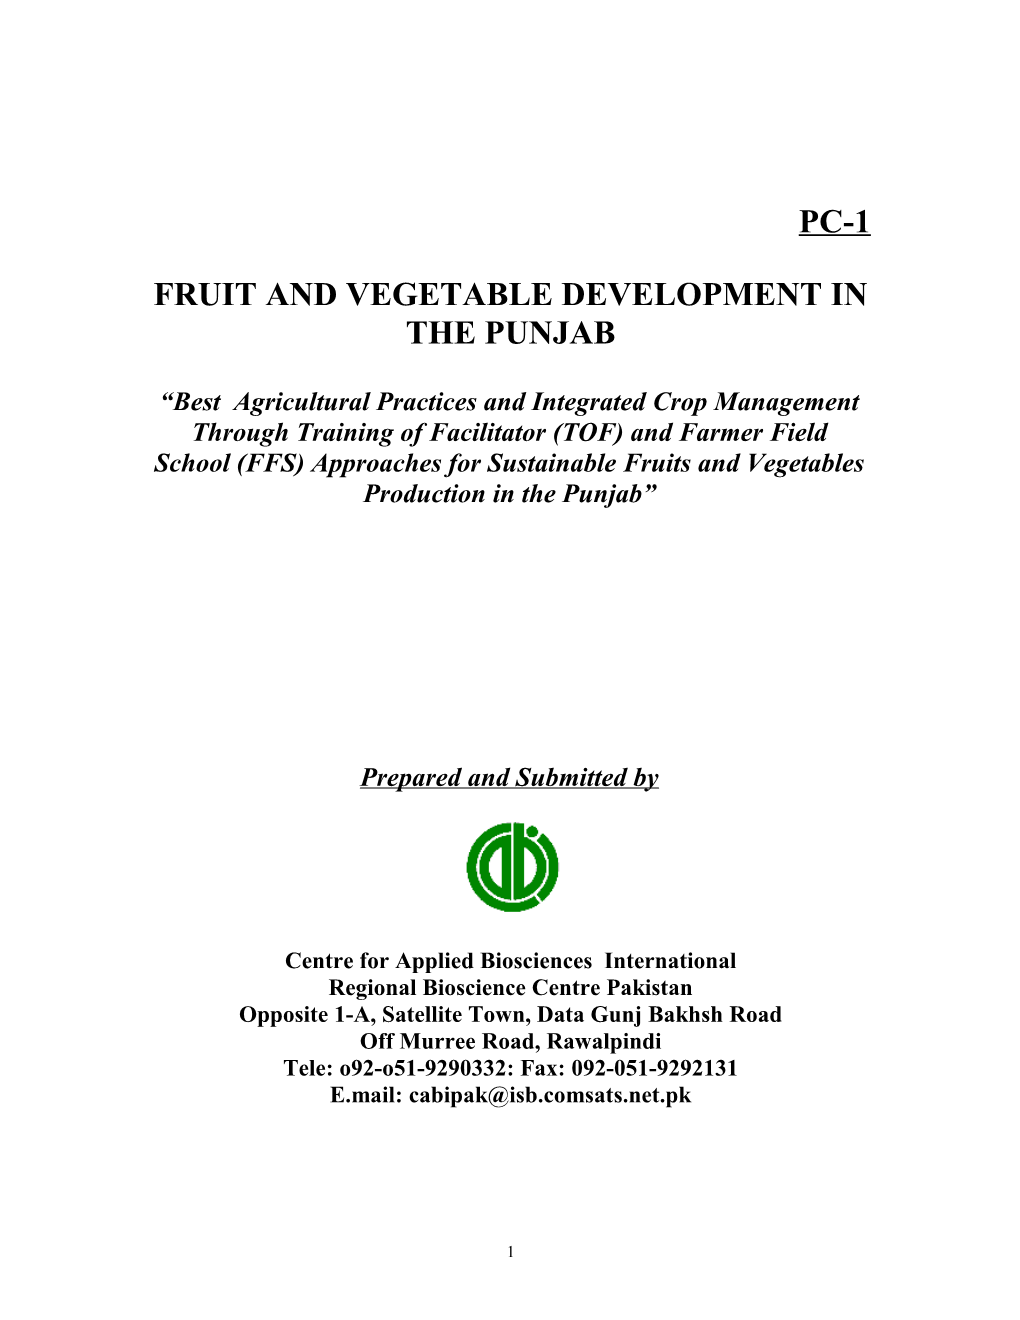 Fruit and Vegetable Development in the Punjab